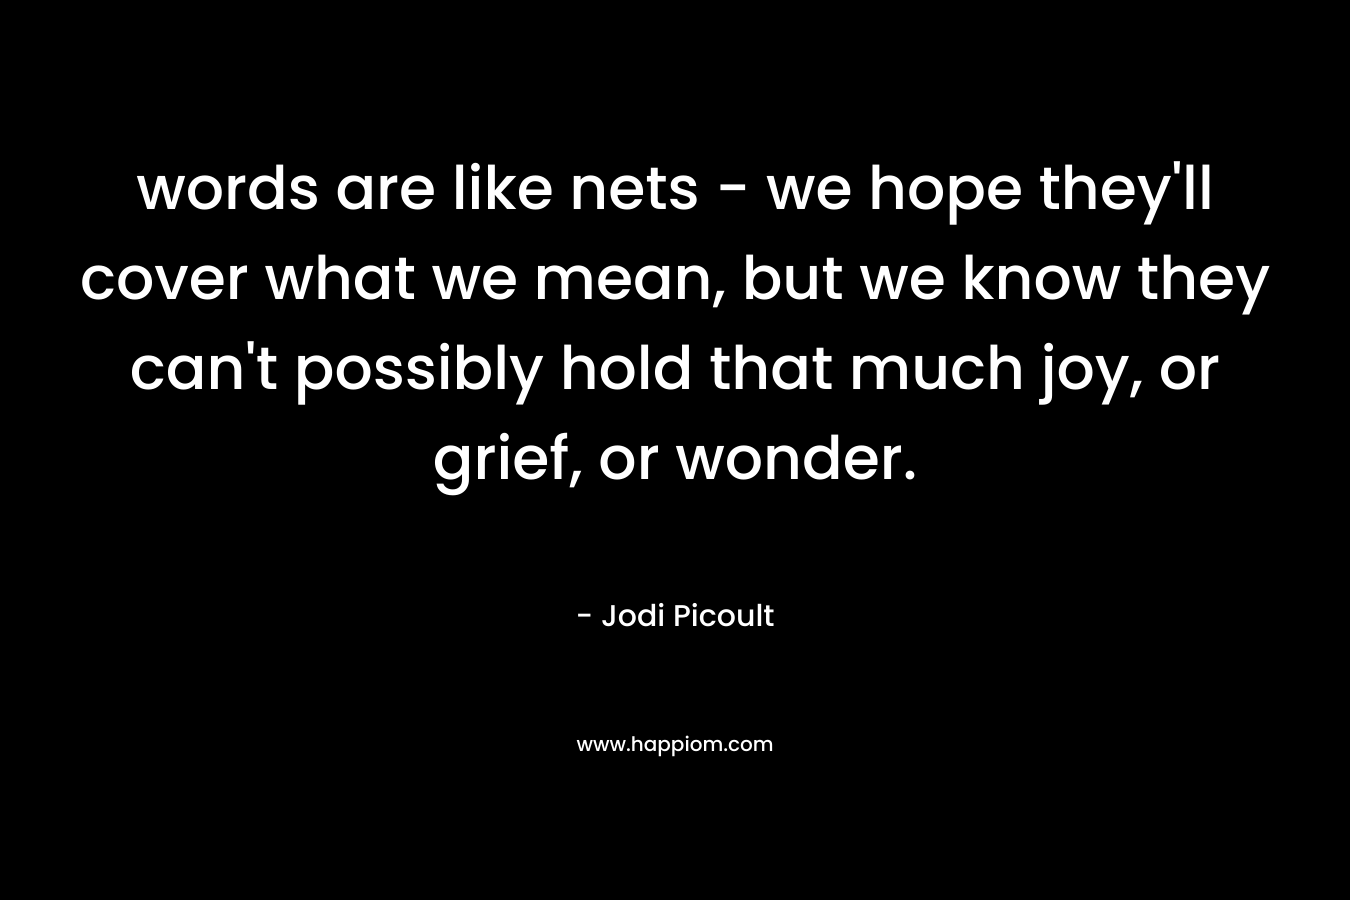 words are like nets - we hope they'll cover what we mean, but we know they can't possibly hold that much joy, or grief, or wonder.